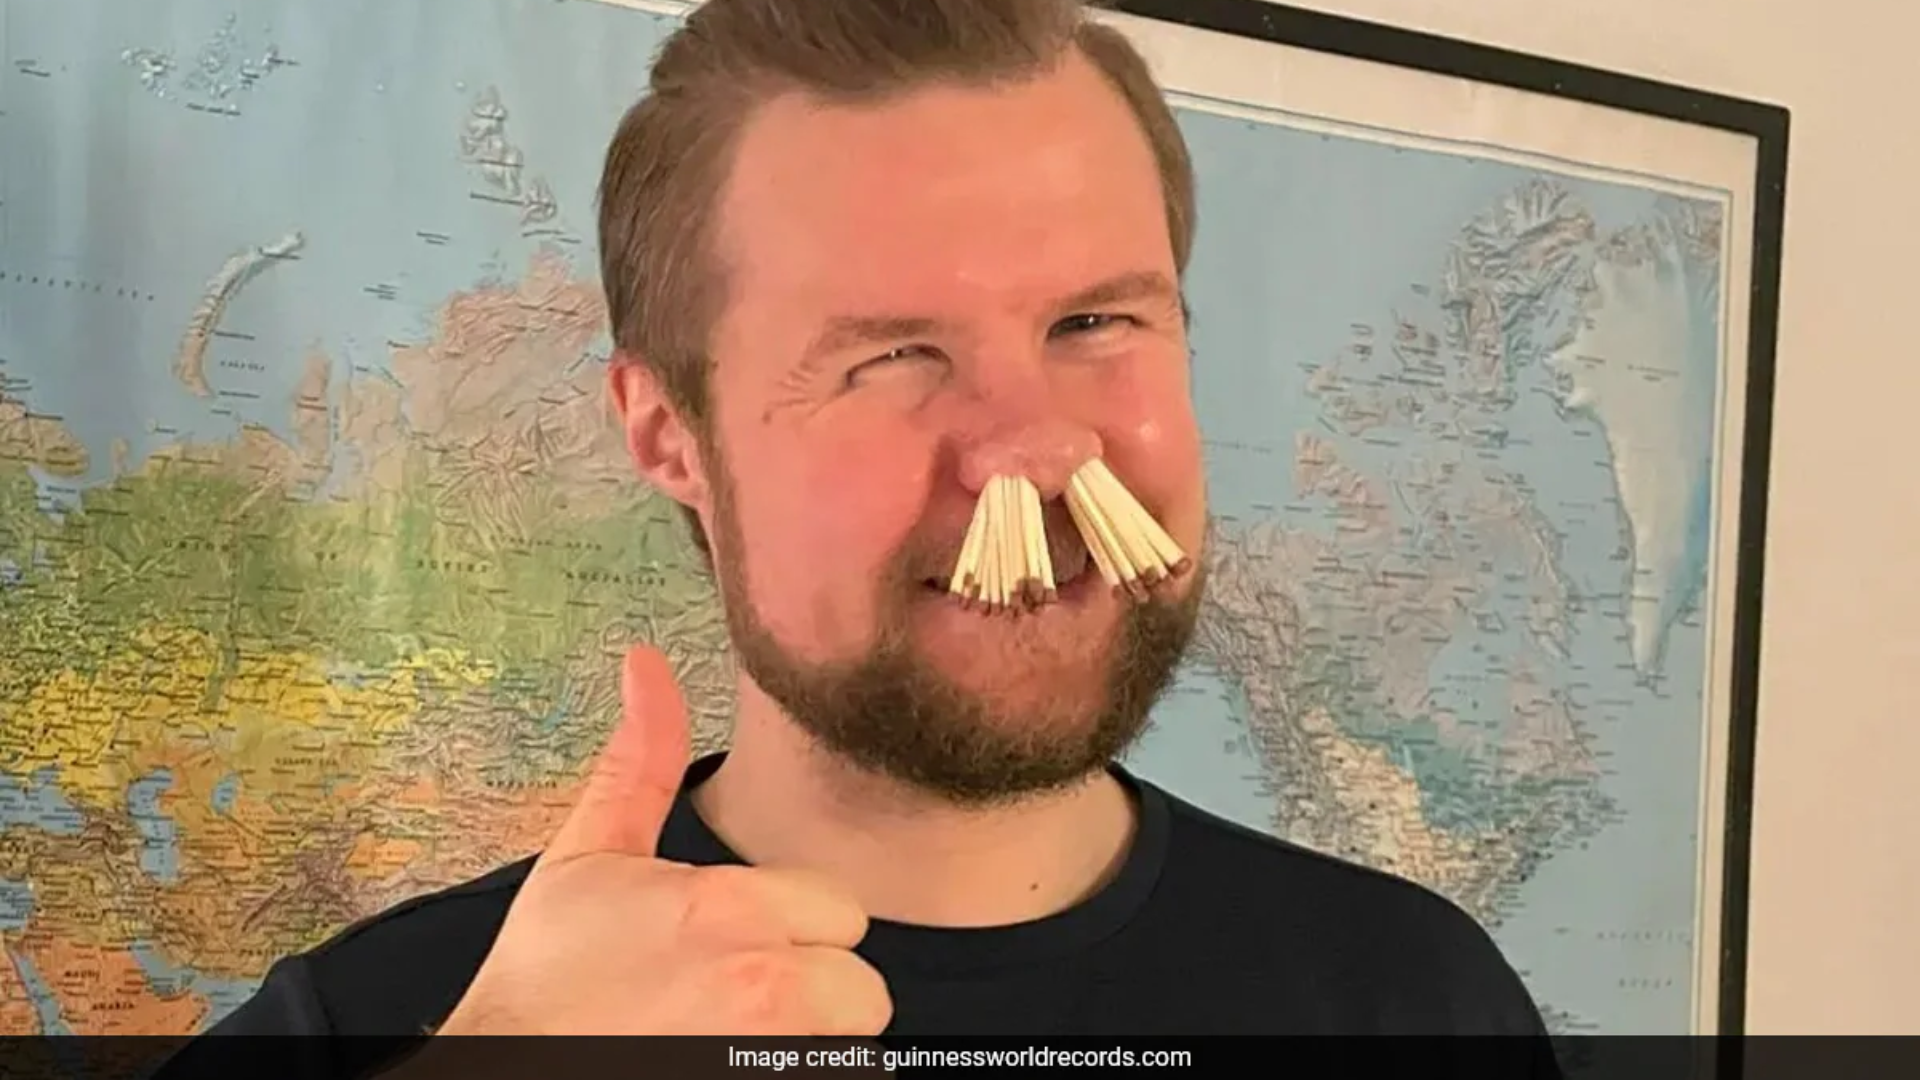 Danish Man Sets Guinness World Record by Stuffing 68 Matchsticks into Nostrils